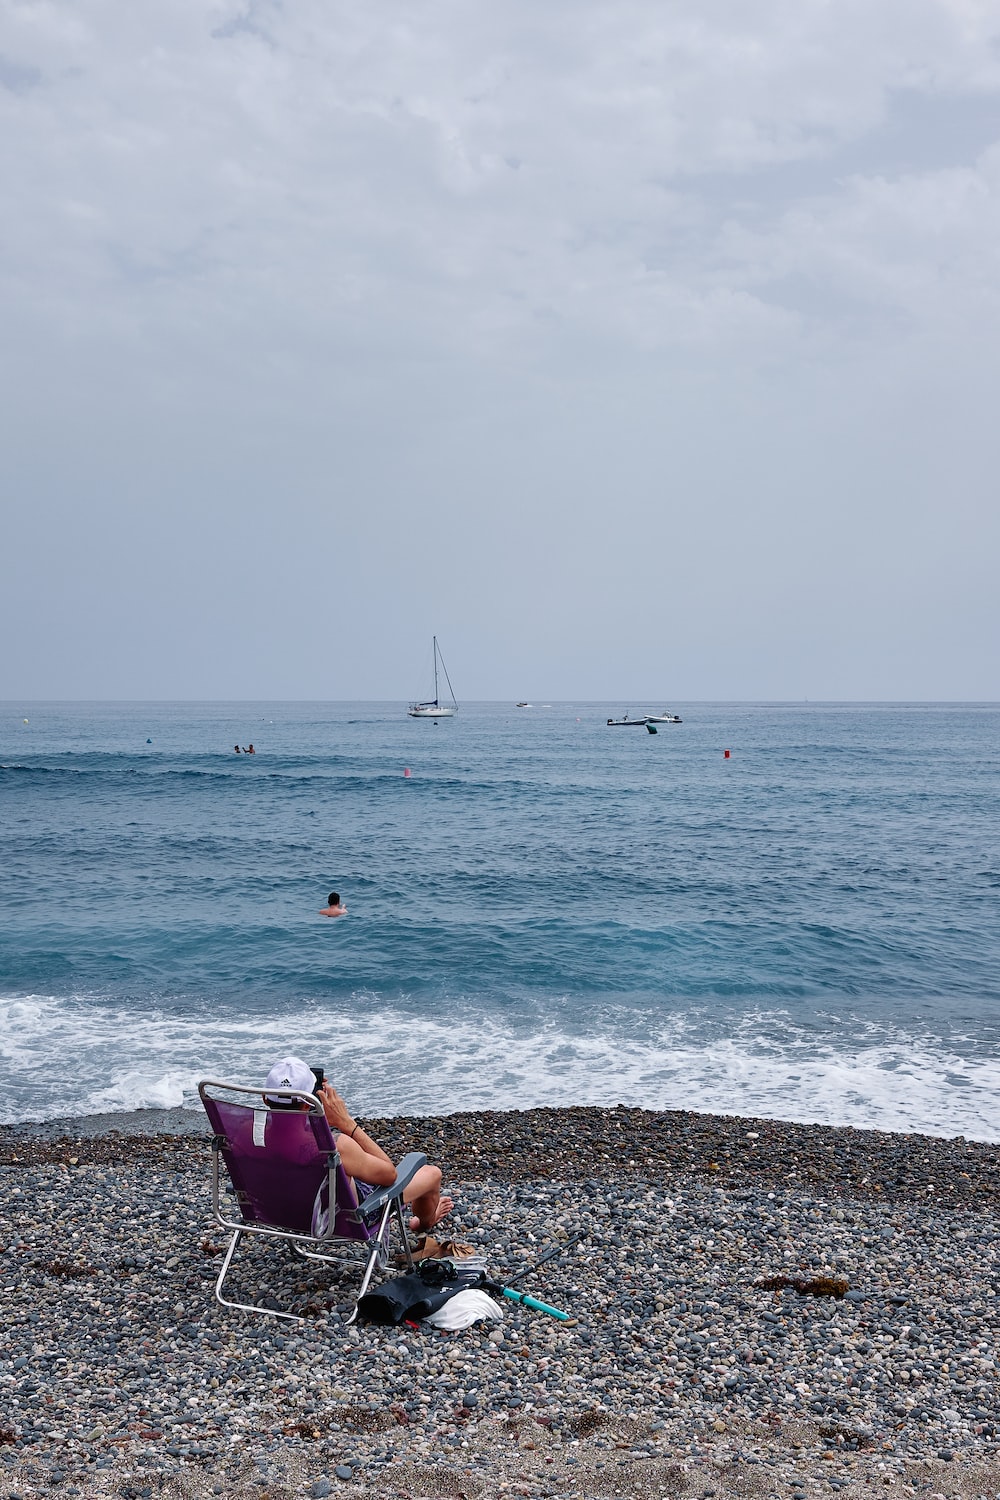 a person sitting in a chair on a beach looking at a sailboat